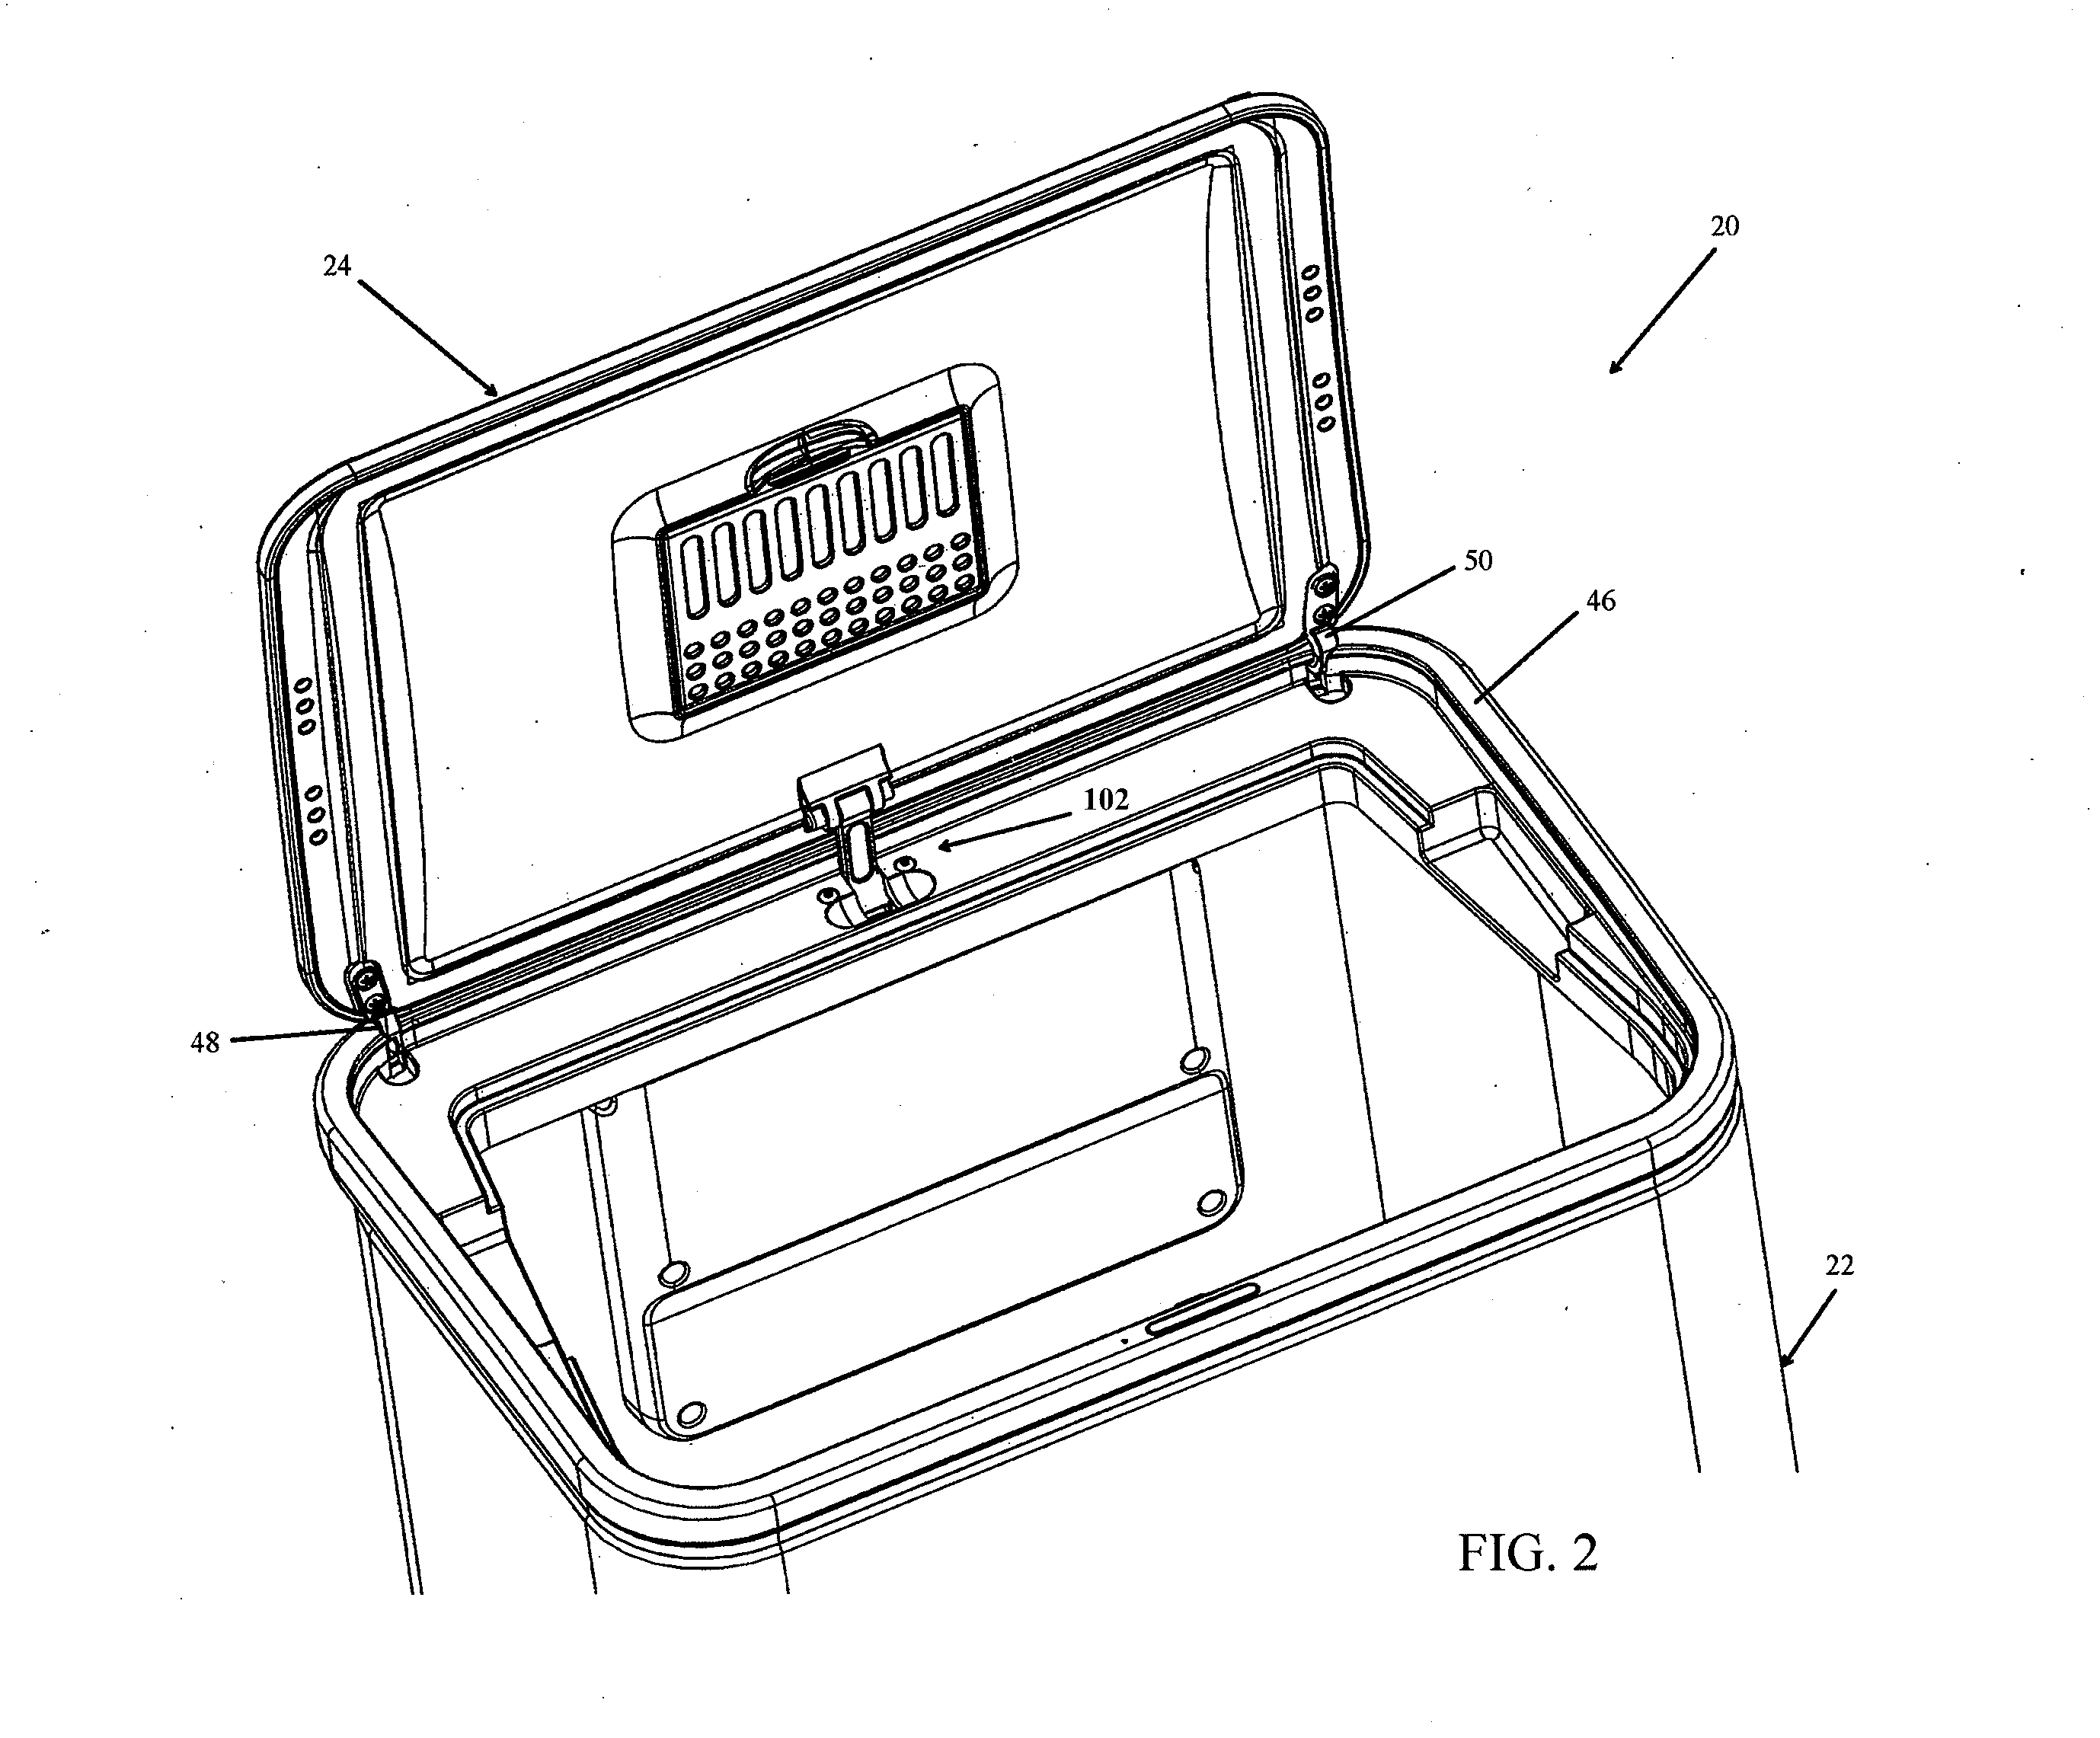 Trash cans with variable gearing assemblies